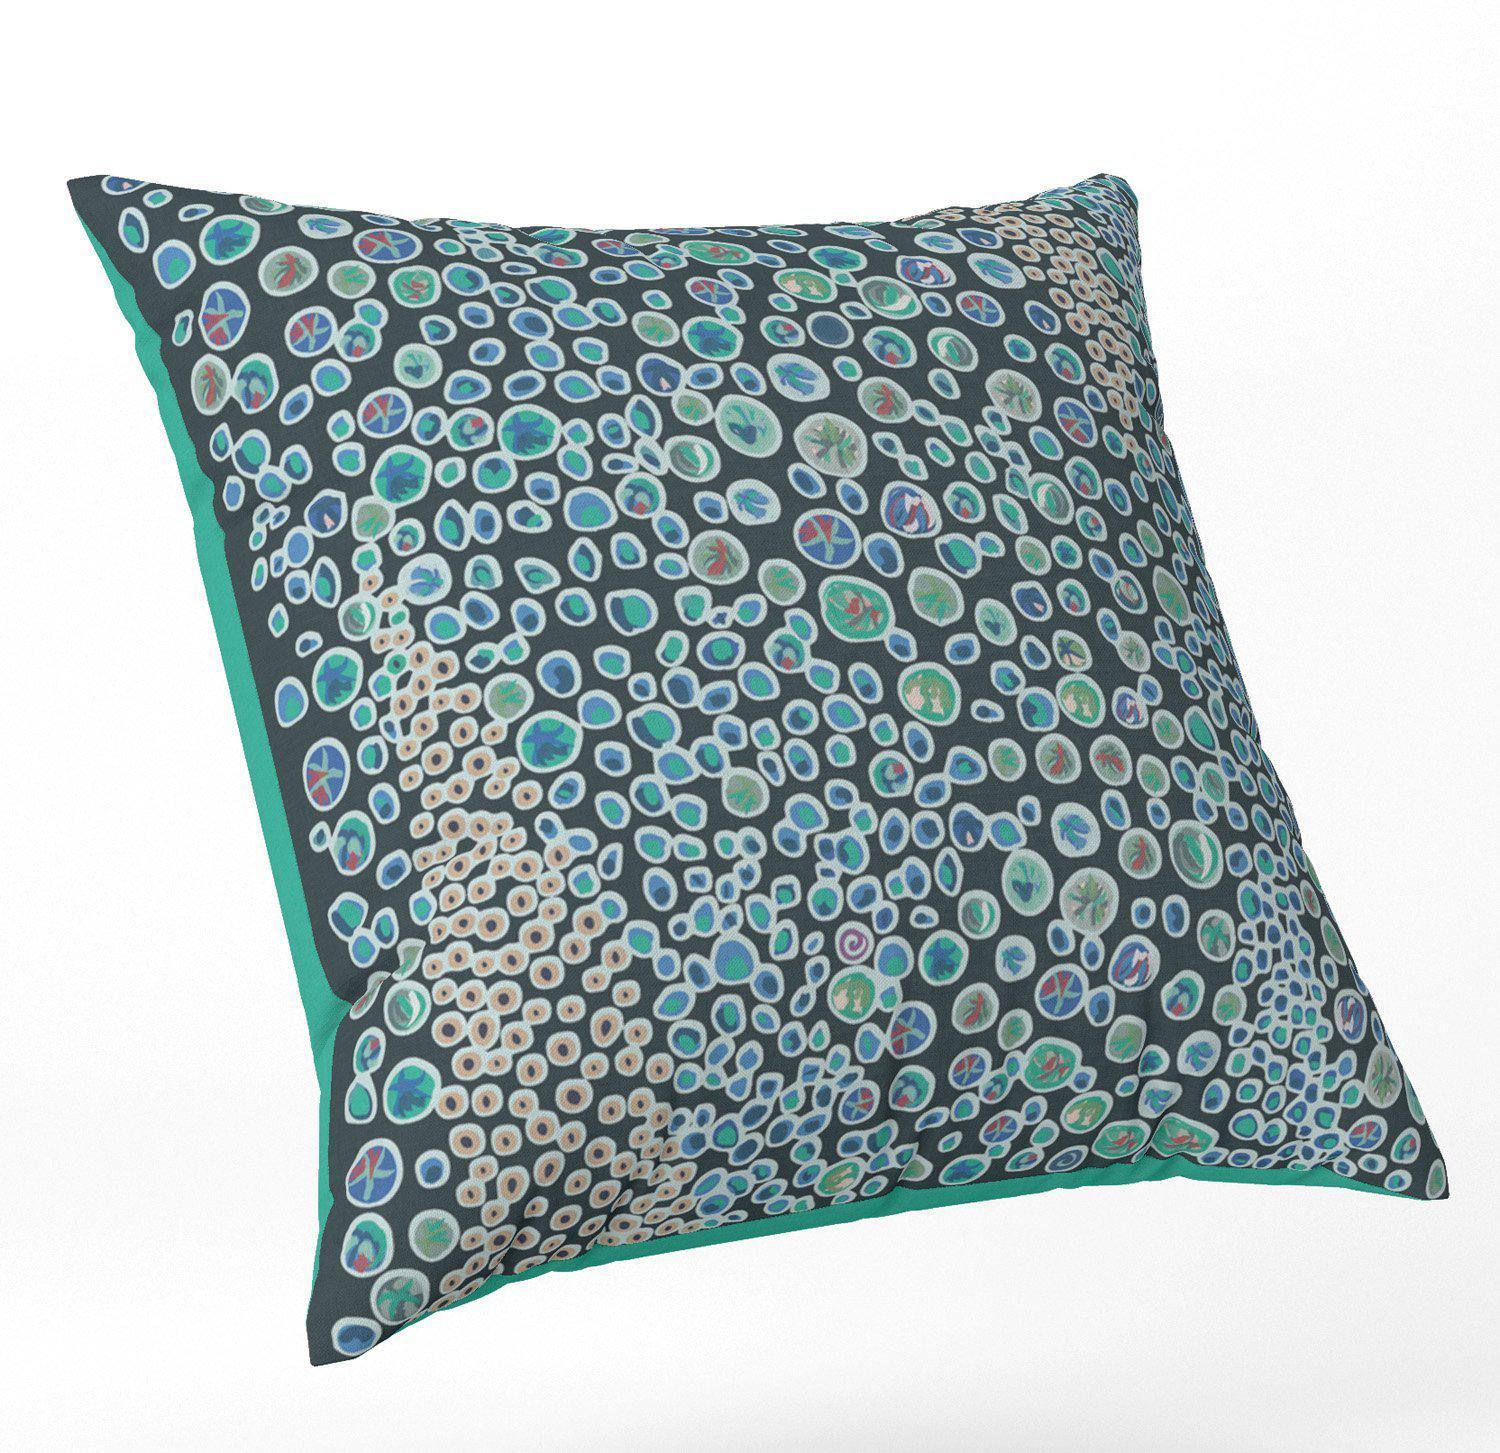 Bubbles (Green) - Funky Art Cushion - Bellissima - House Of Turnowsky Pillows - Handmade Cushions UK - WeLoveCushions